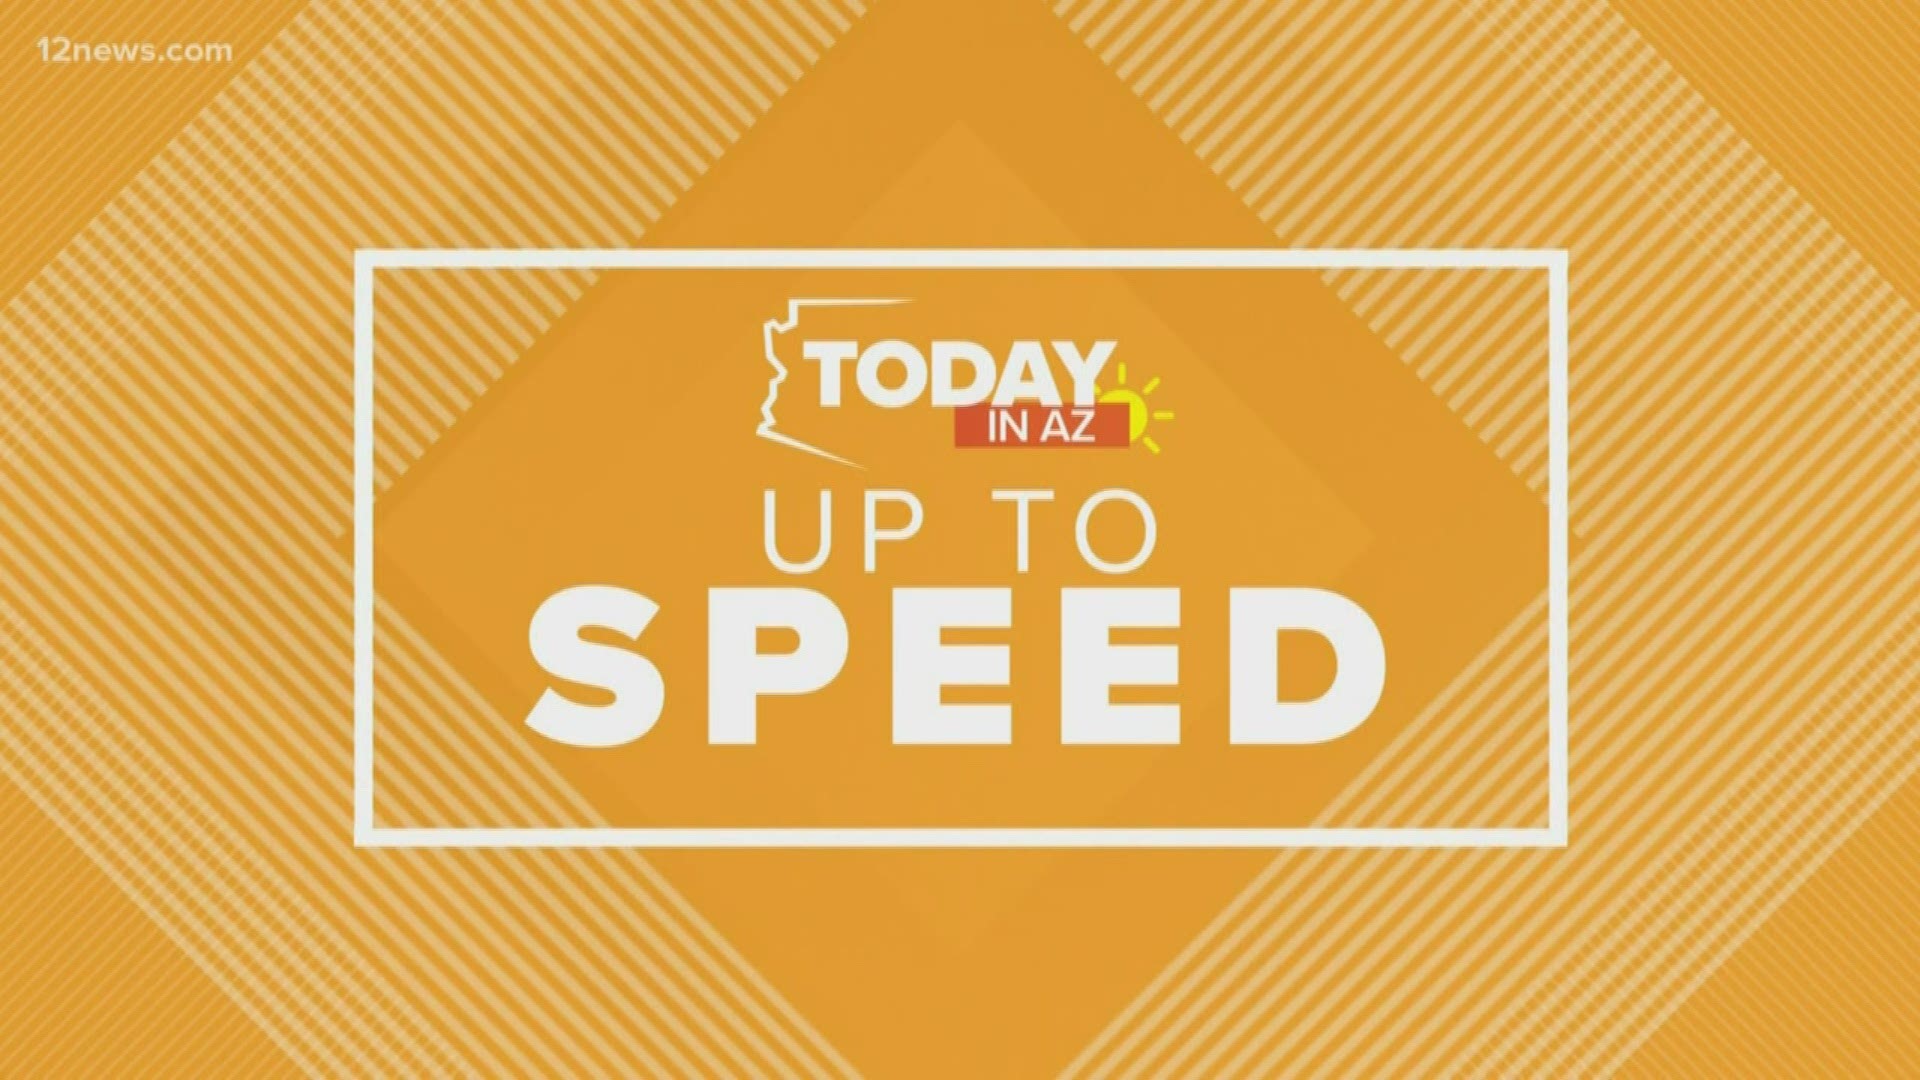 Get 'Up to Speed' on Thursday morning.